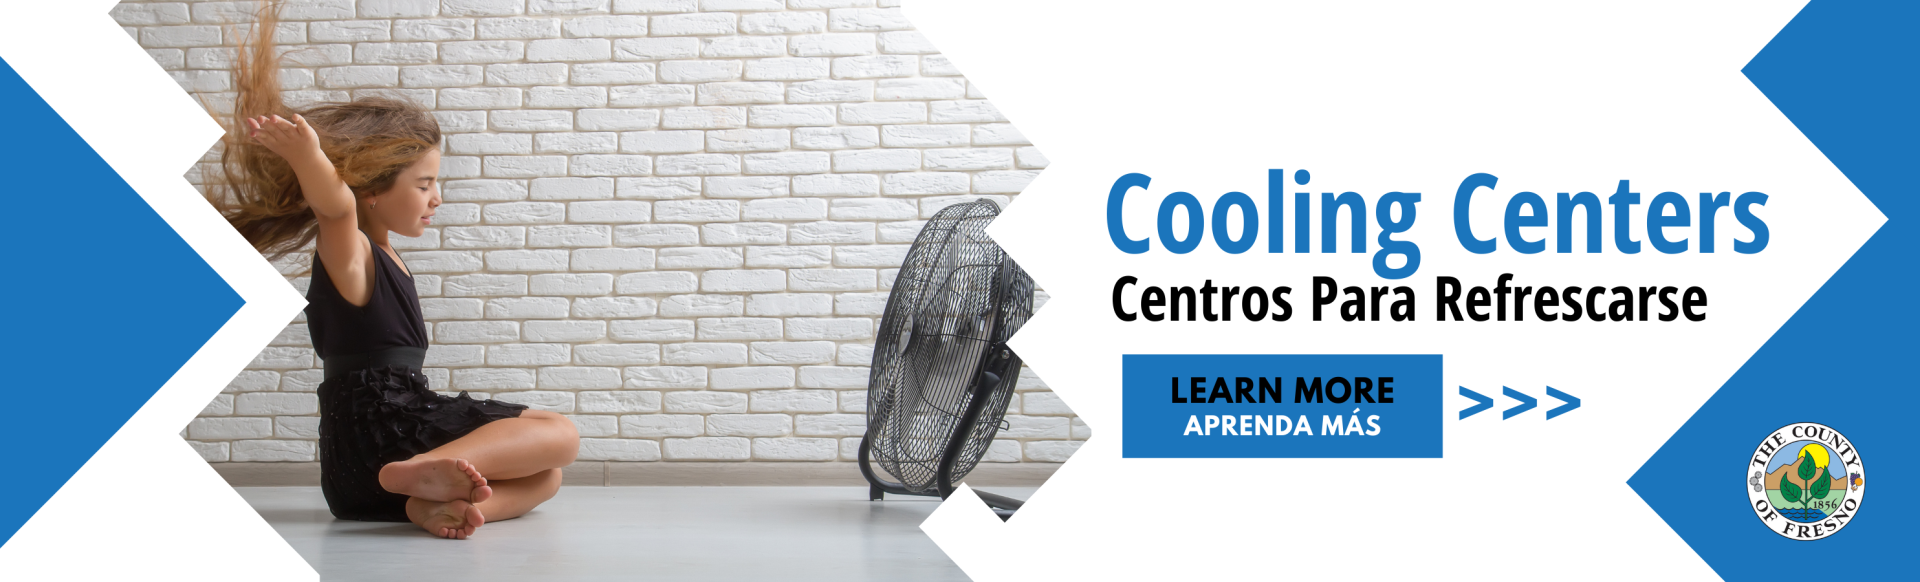 Cooling Centers - Centros Para Refrescarse